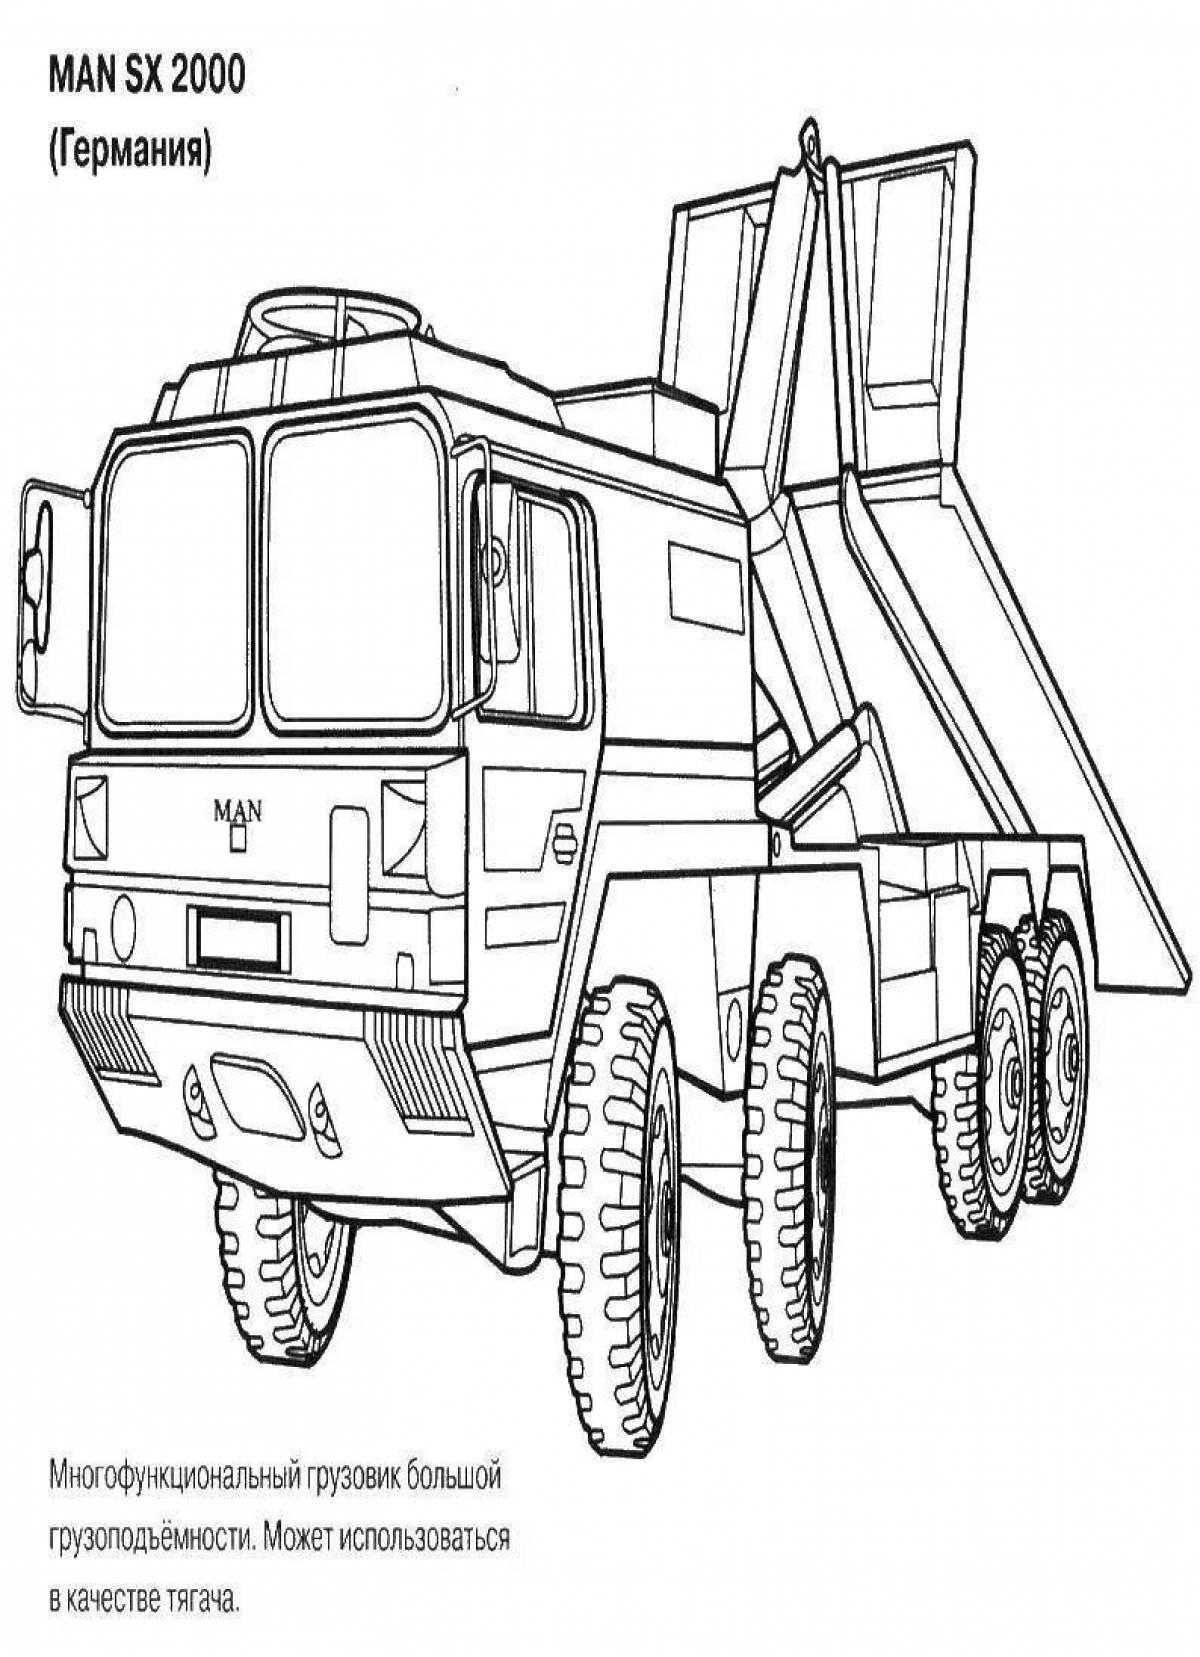 Gorgeous military truck coloring page